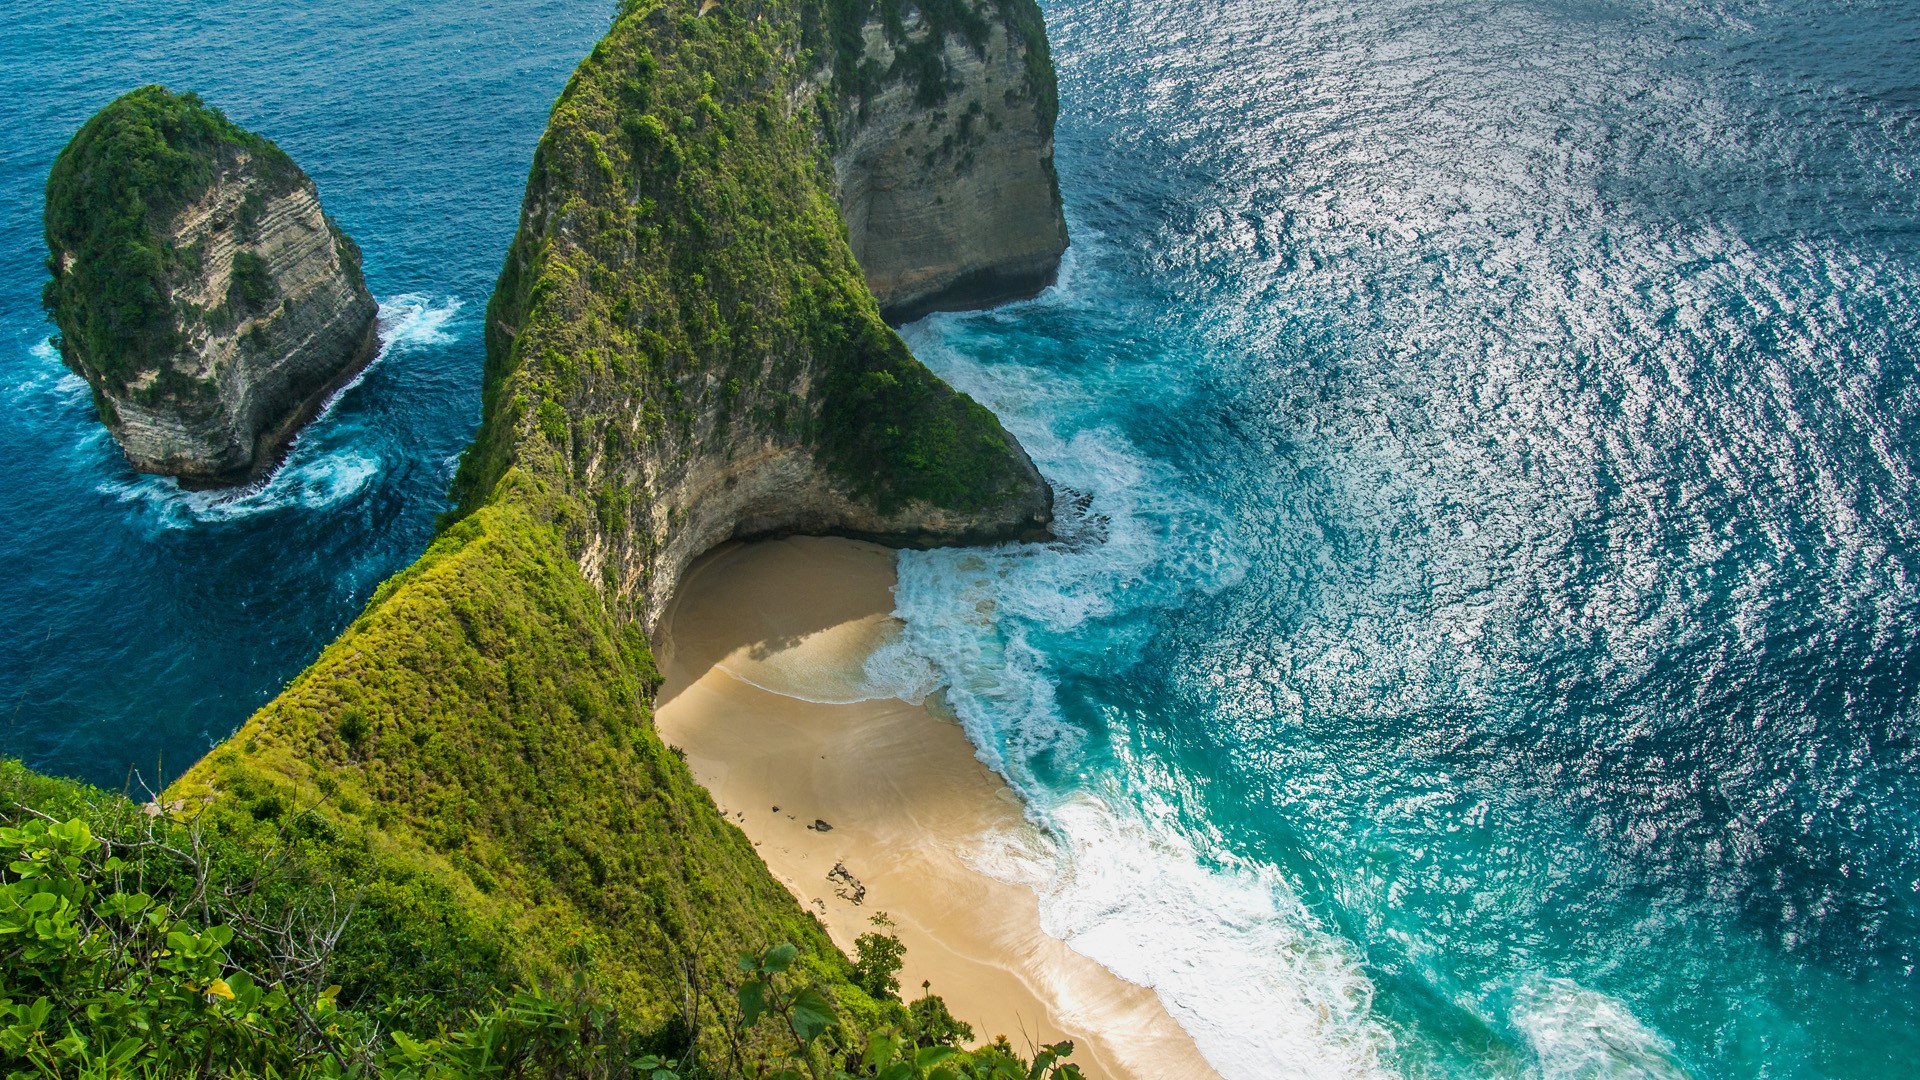 10 of Earths most beautiful beaches • Earth.com